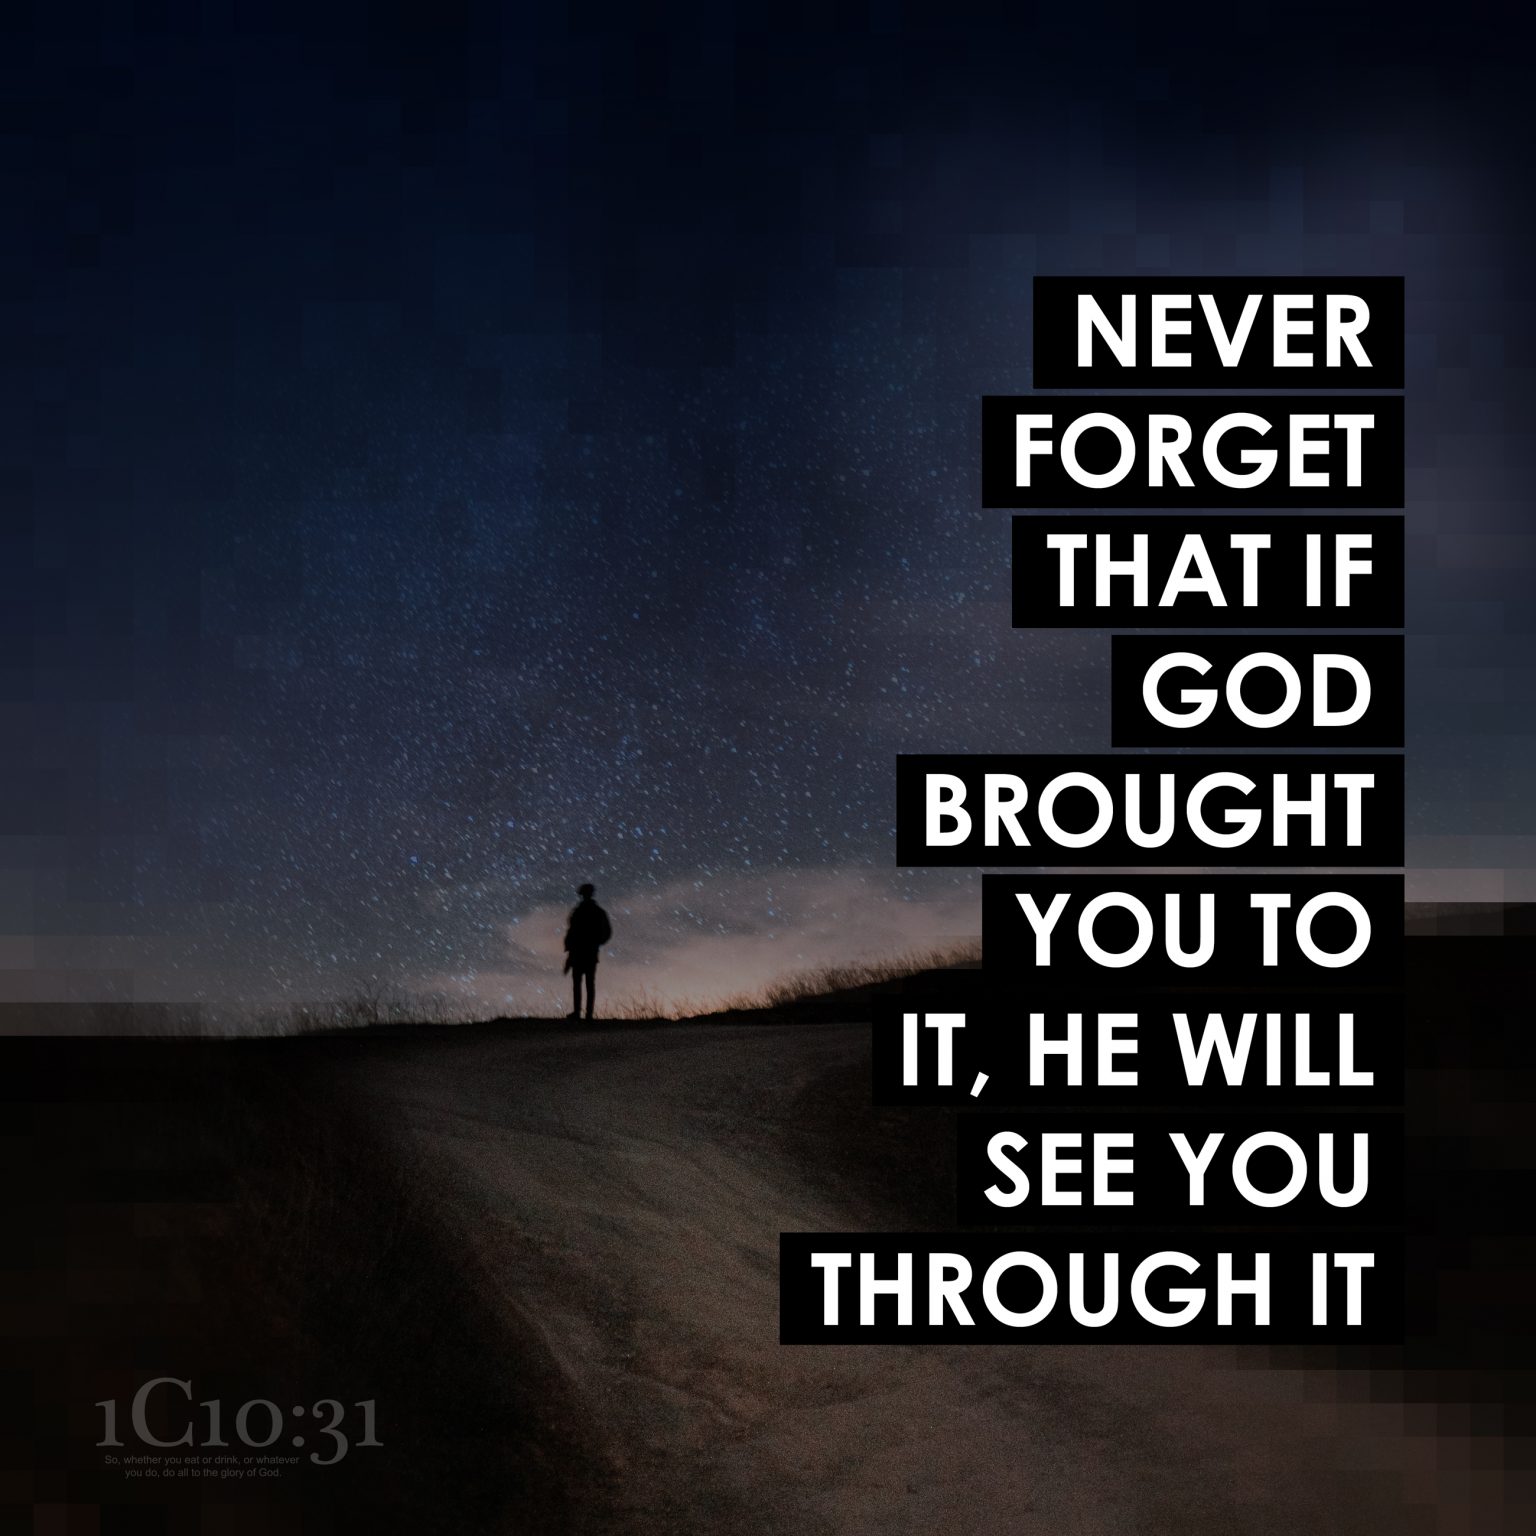 Never Forget That If God Brought You To It, He Will See You Through It from 1C1031.co.zw